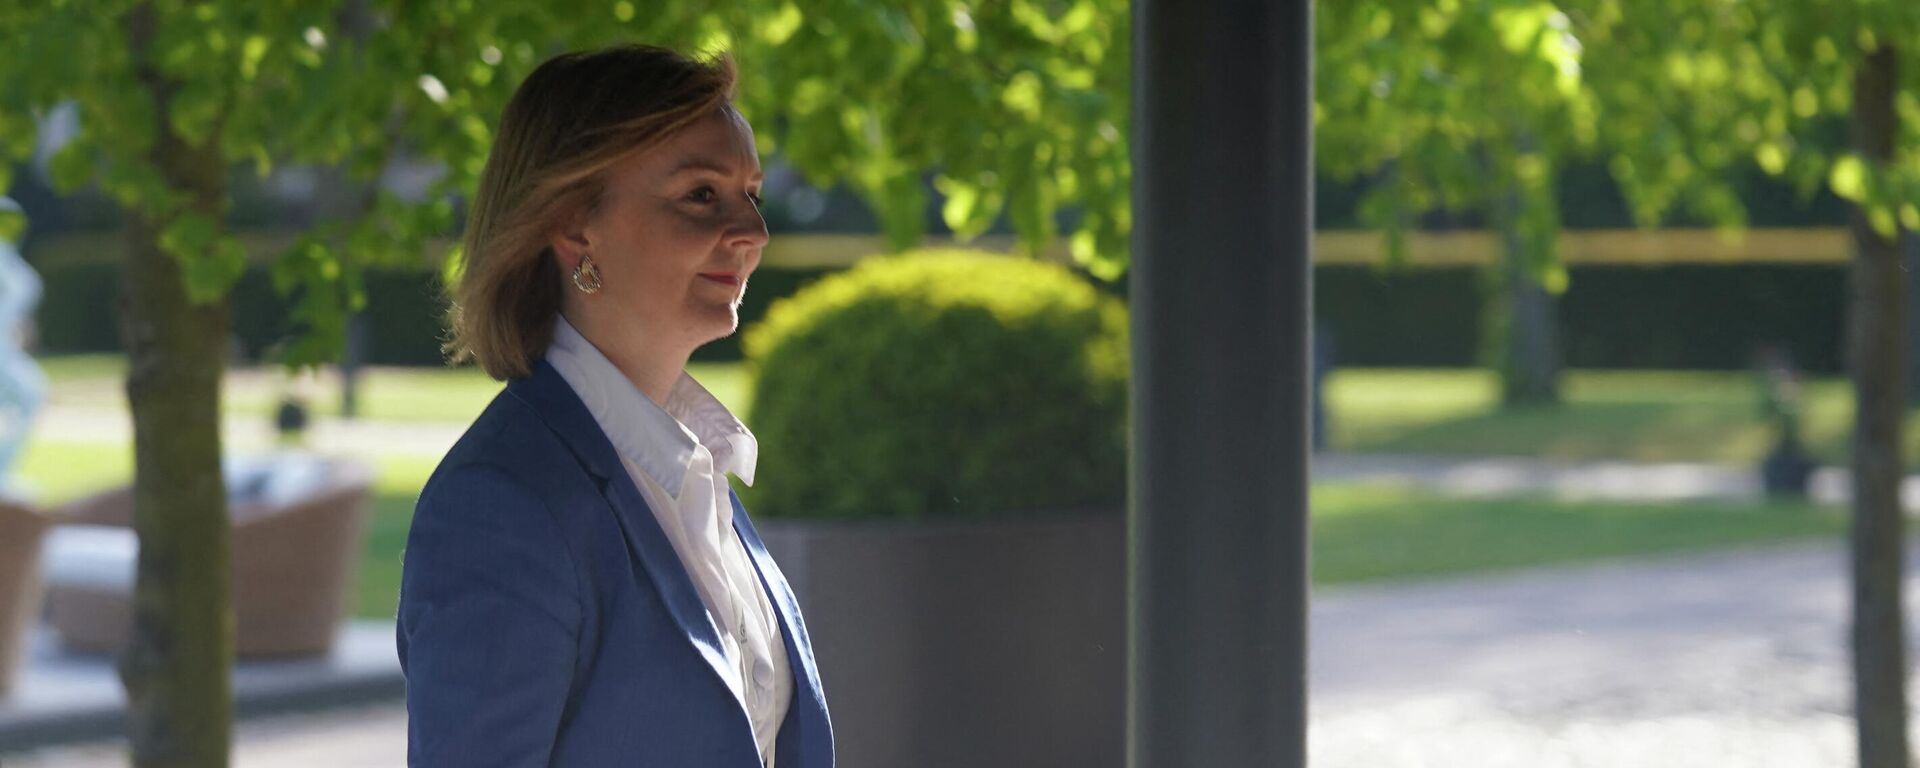 British Secretary for Foreign Affairs Elizabeth Truss (L) walks to bilateral talks with her Japanese counterpart at the meeting of the G7 foreign ministers at the Weissenhдuser Strand in Wangels, Northern Germany on May 12, 2022. - Sputnik International, 1920, 21.05.2022